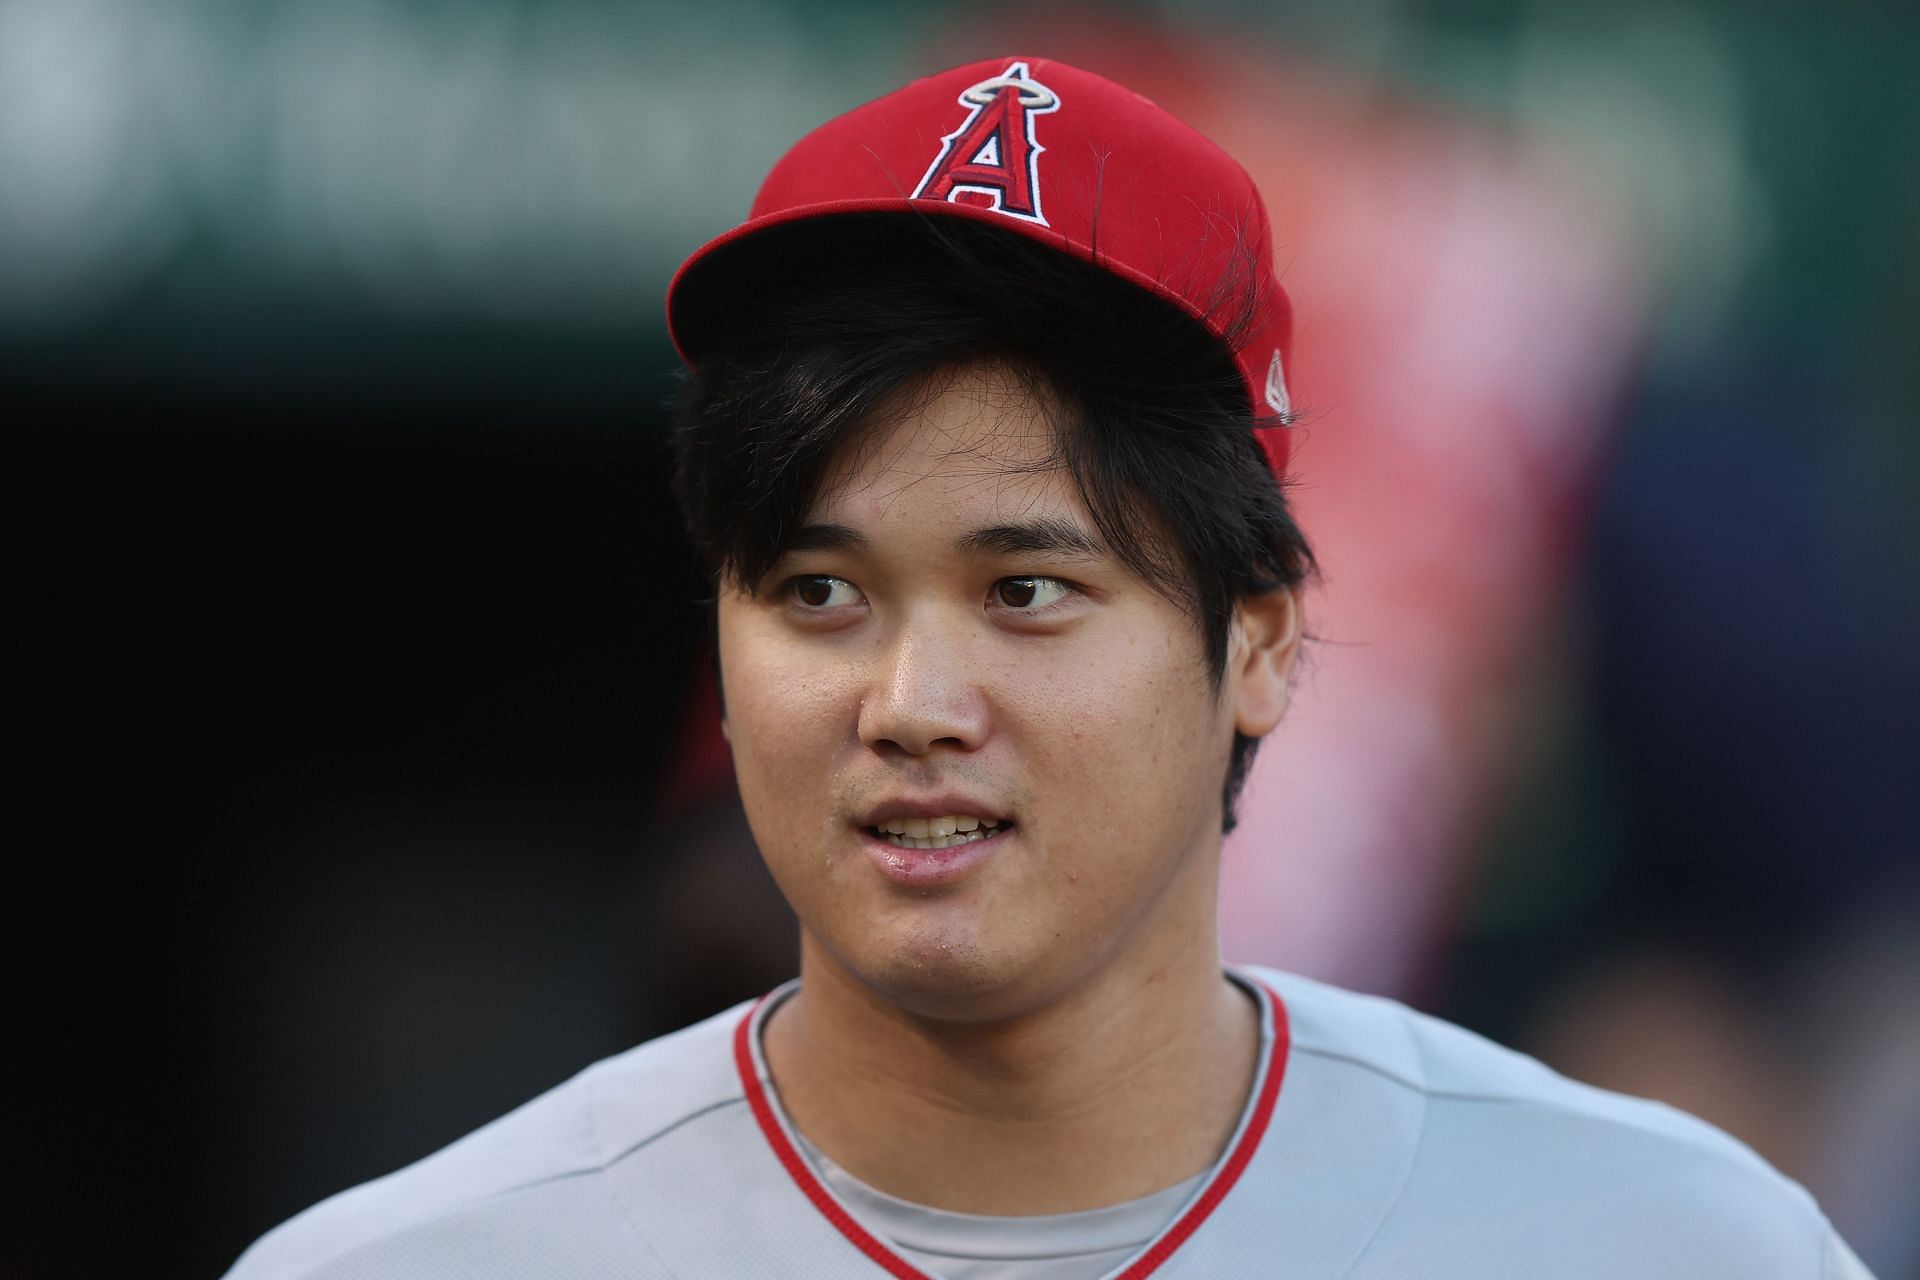 Shohei Ohtani prepares in the dugout before a game against the Oakland Athletics.